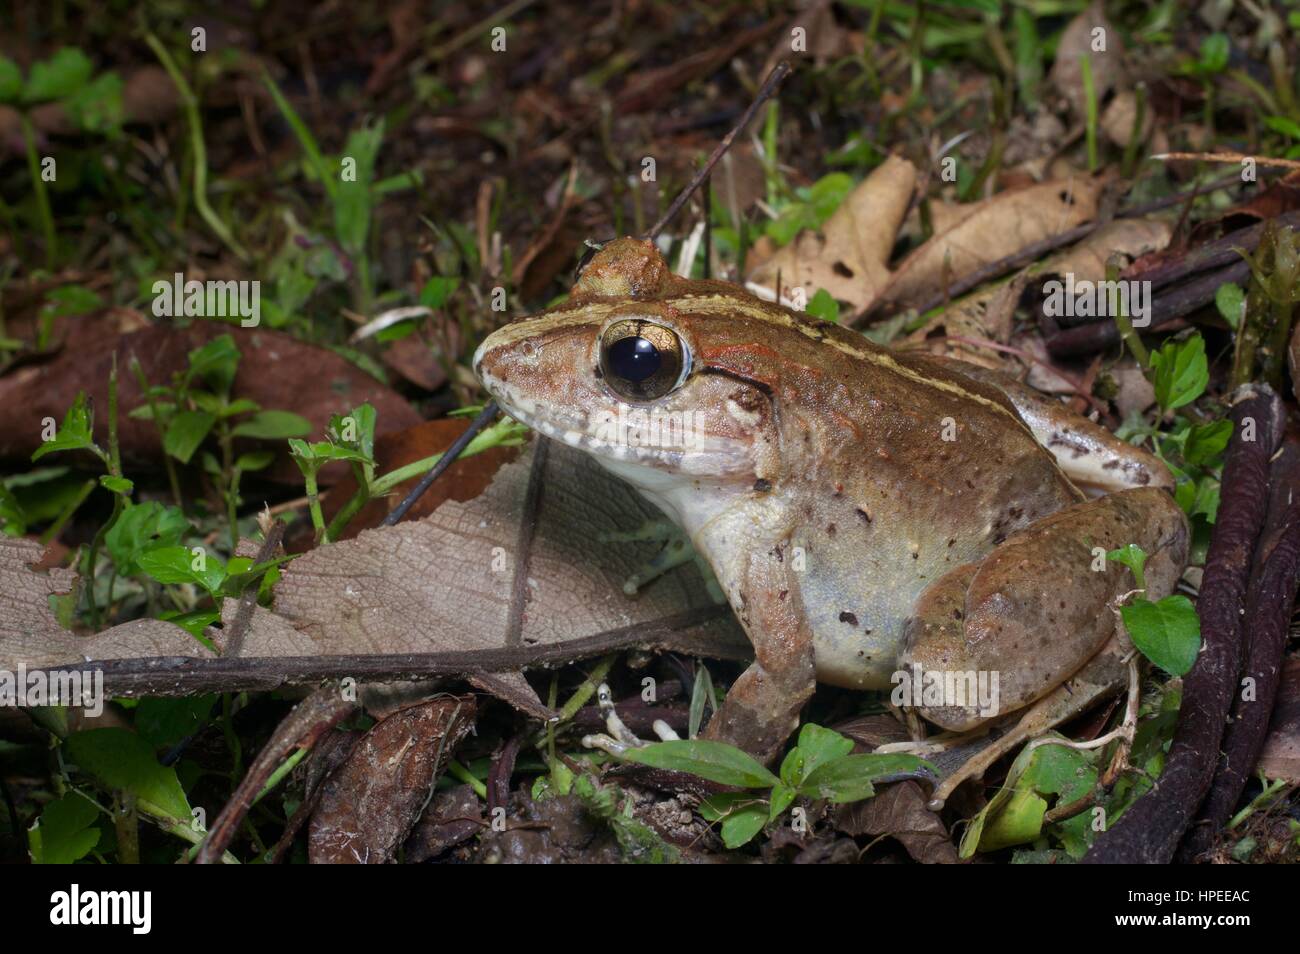 A Malesian Frog (Limnonectes malesianus) in the rainforest at night in Fraser's Hill, Pahang, Malaysia Stock Photo